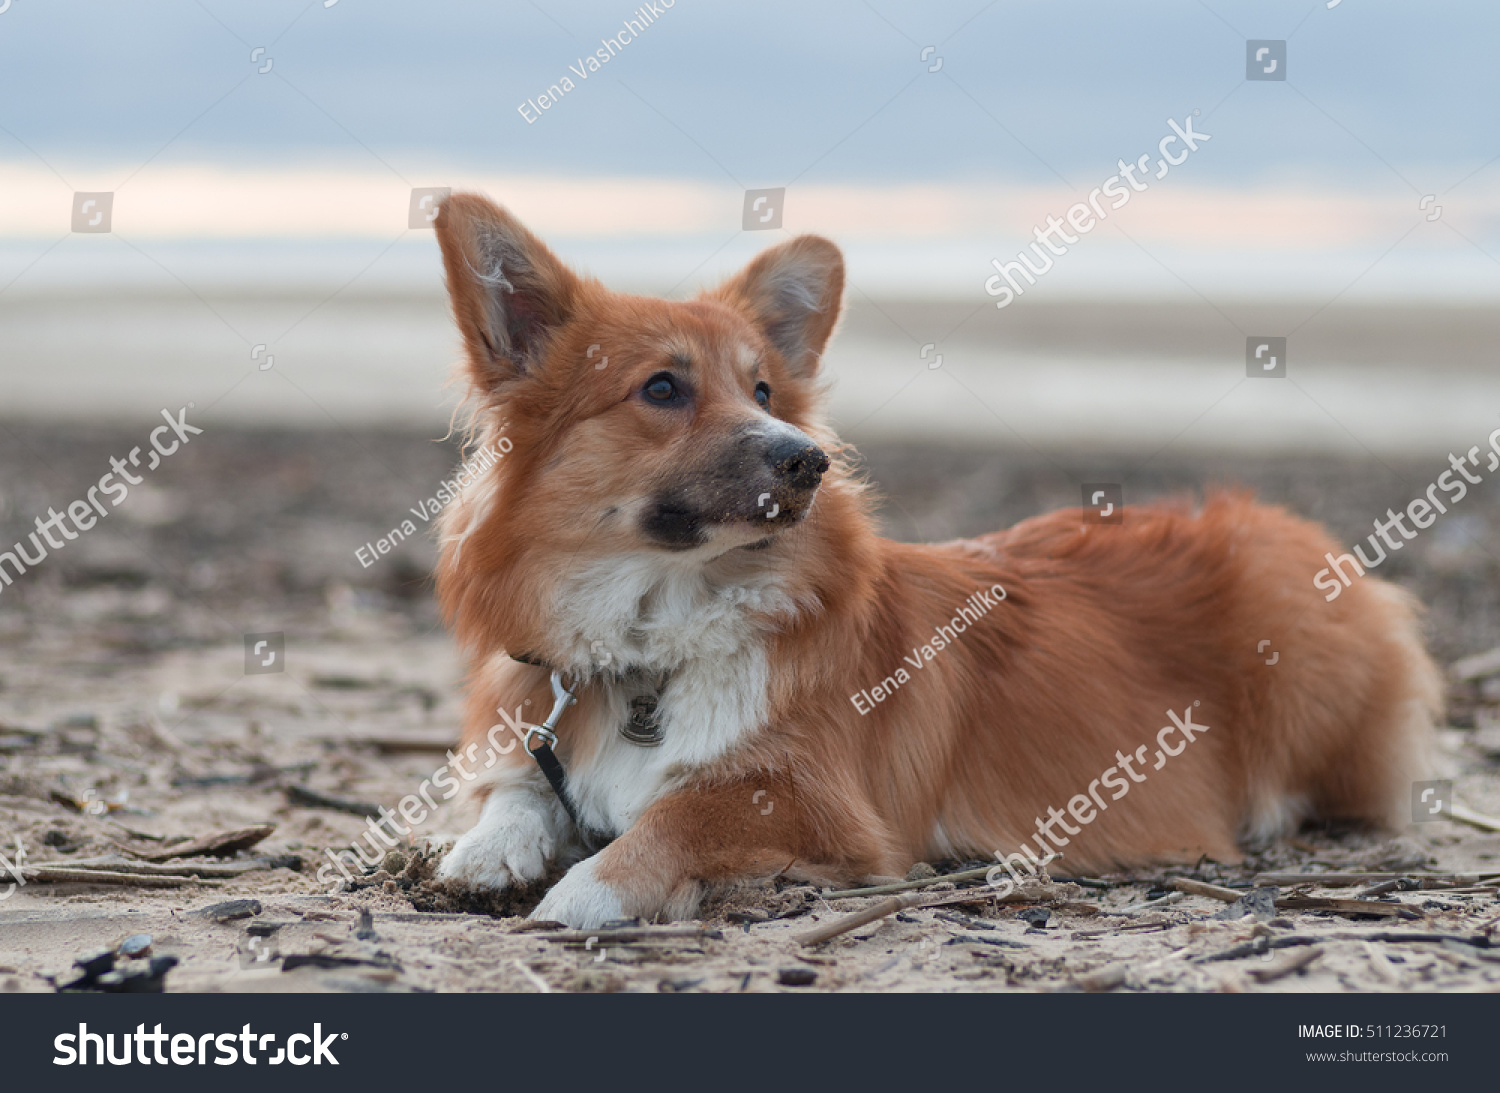 Photo of a dog (breed welsh pembroke corgi fluffy, red colored) lying on the sand on a beach on the sun set, looking on the right side #511236721